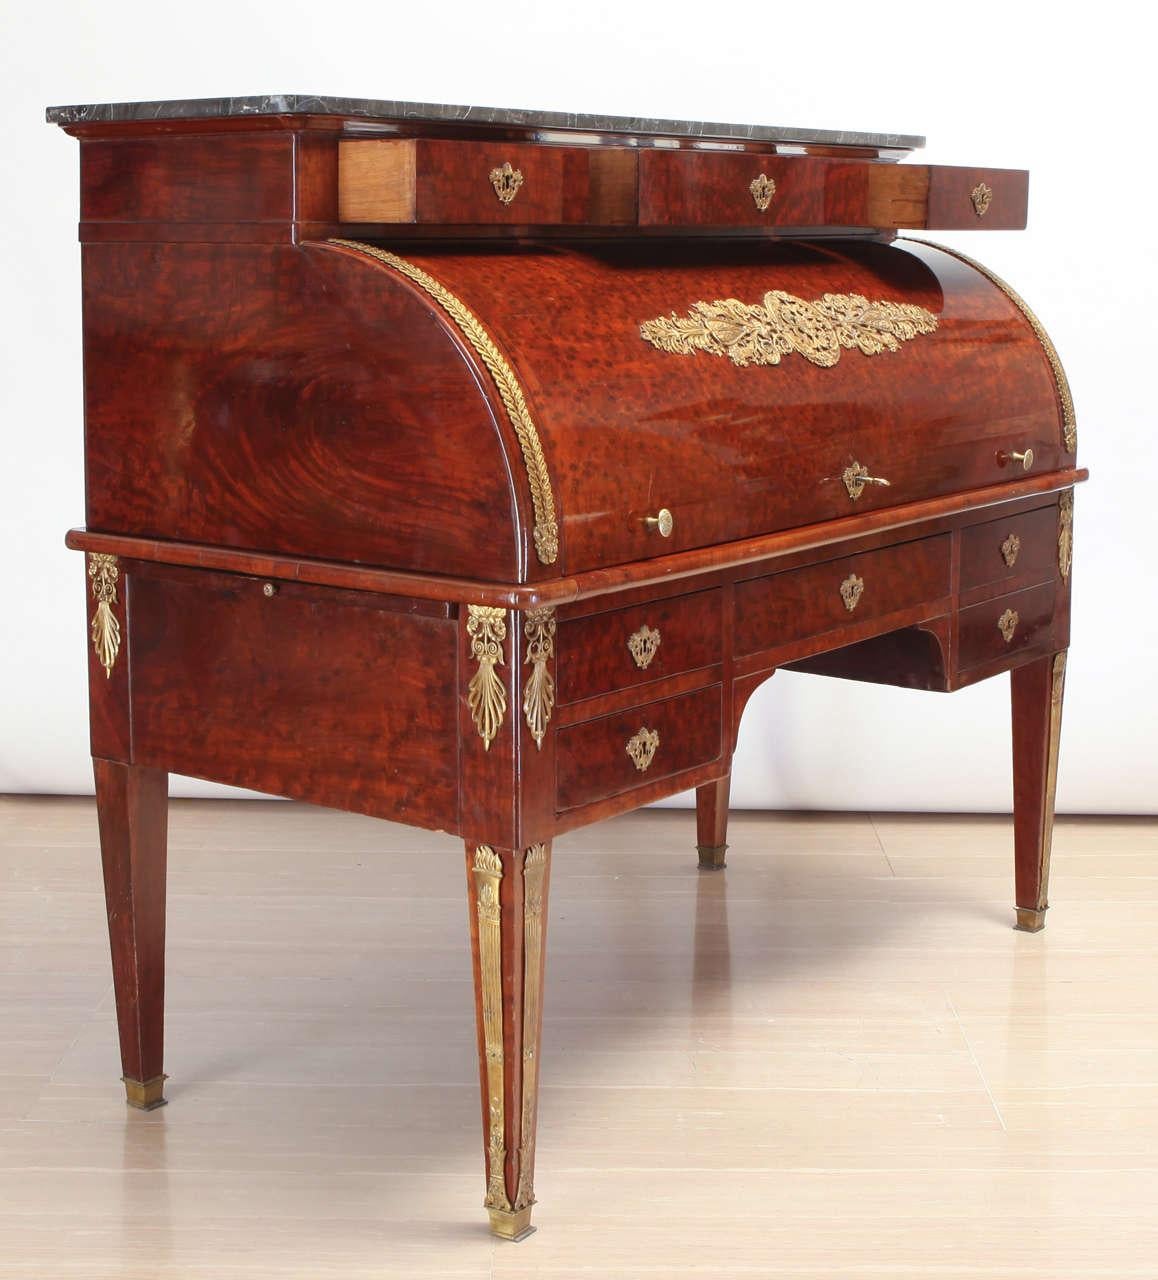 French Empire Mahogany Bureau à Cylindre Writing Table, circa 1810 For Sale 6